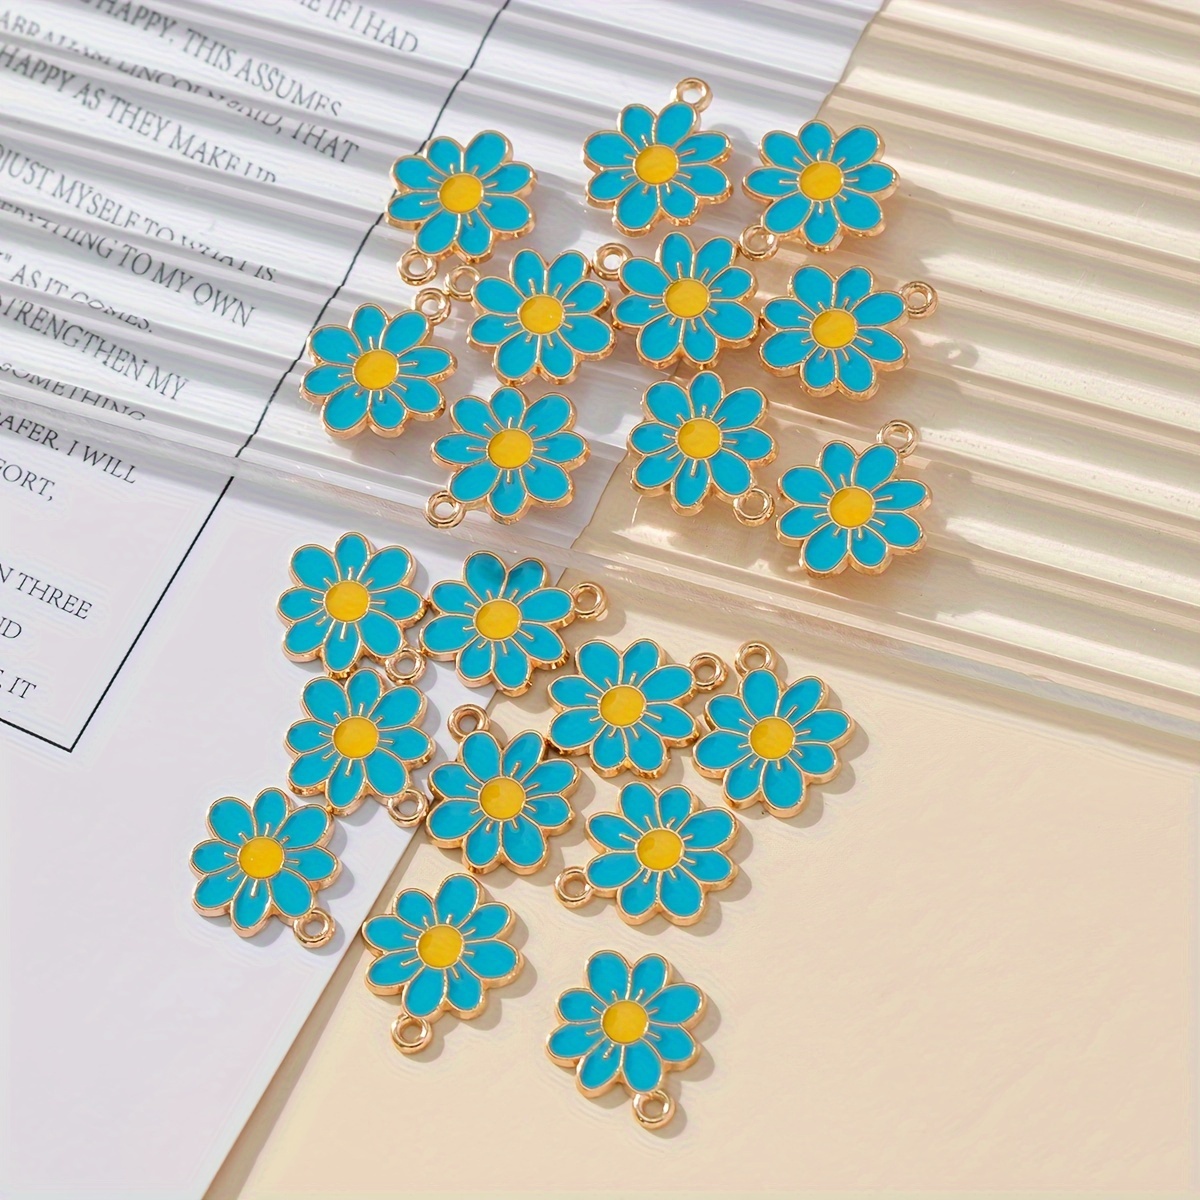 10pcs 16*13mm Cute Daisy Flower Charms for Jewelry Making Accessories  Pendant Necklace Earring Charms Handmade Findings DIY